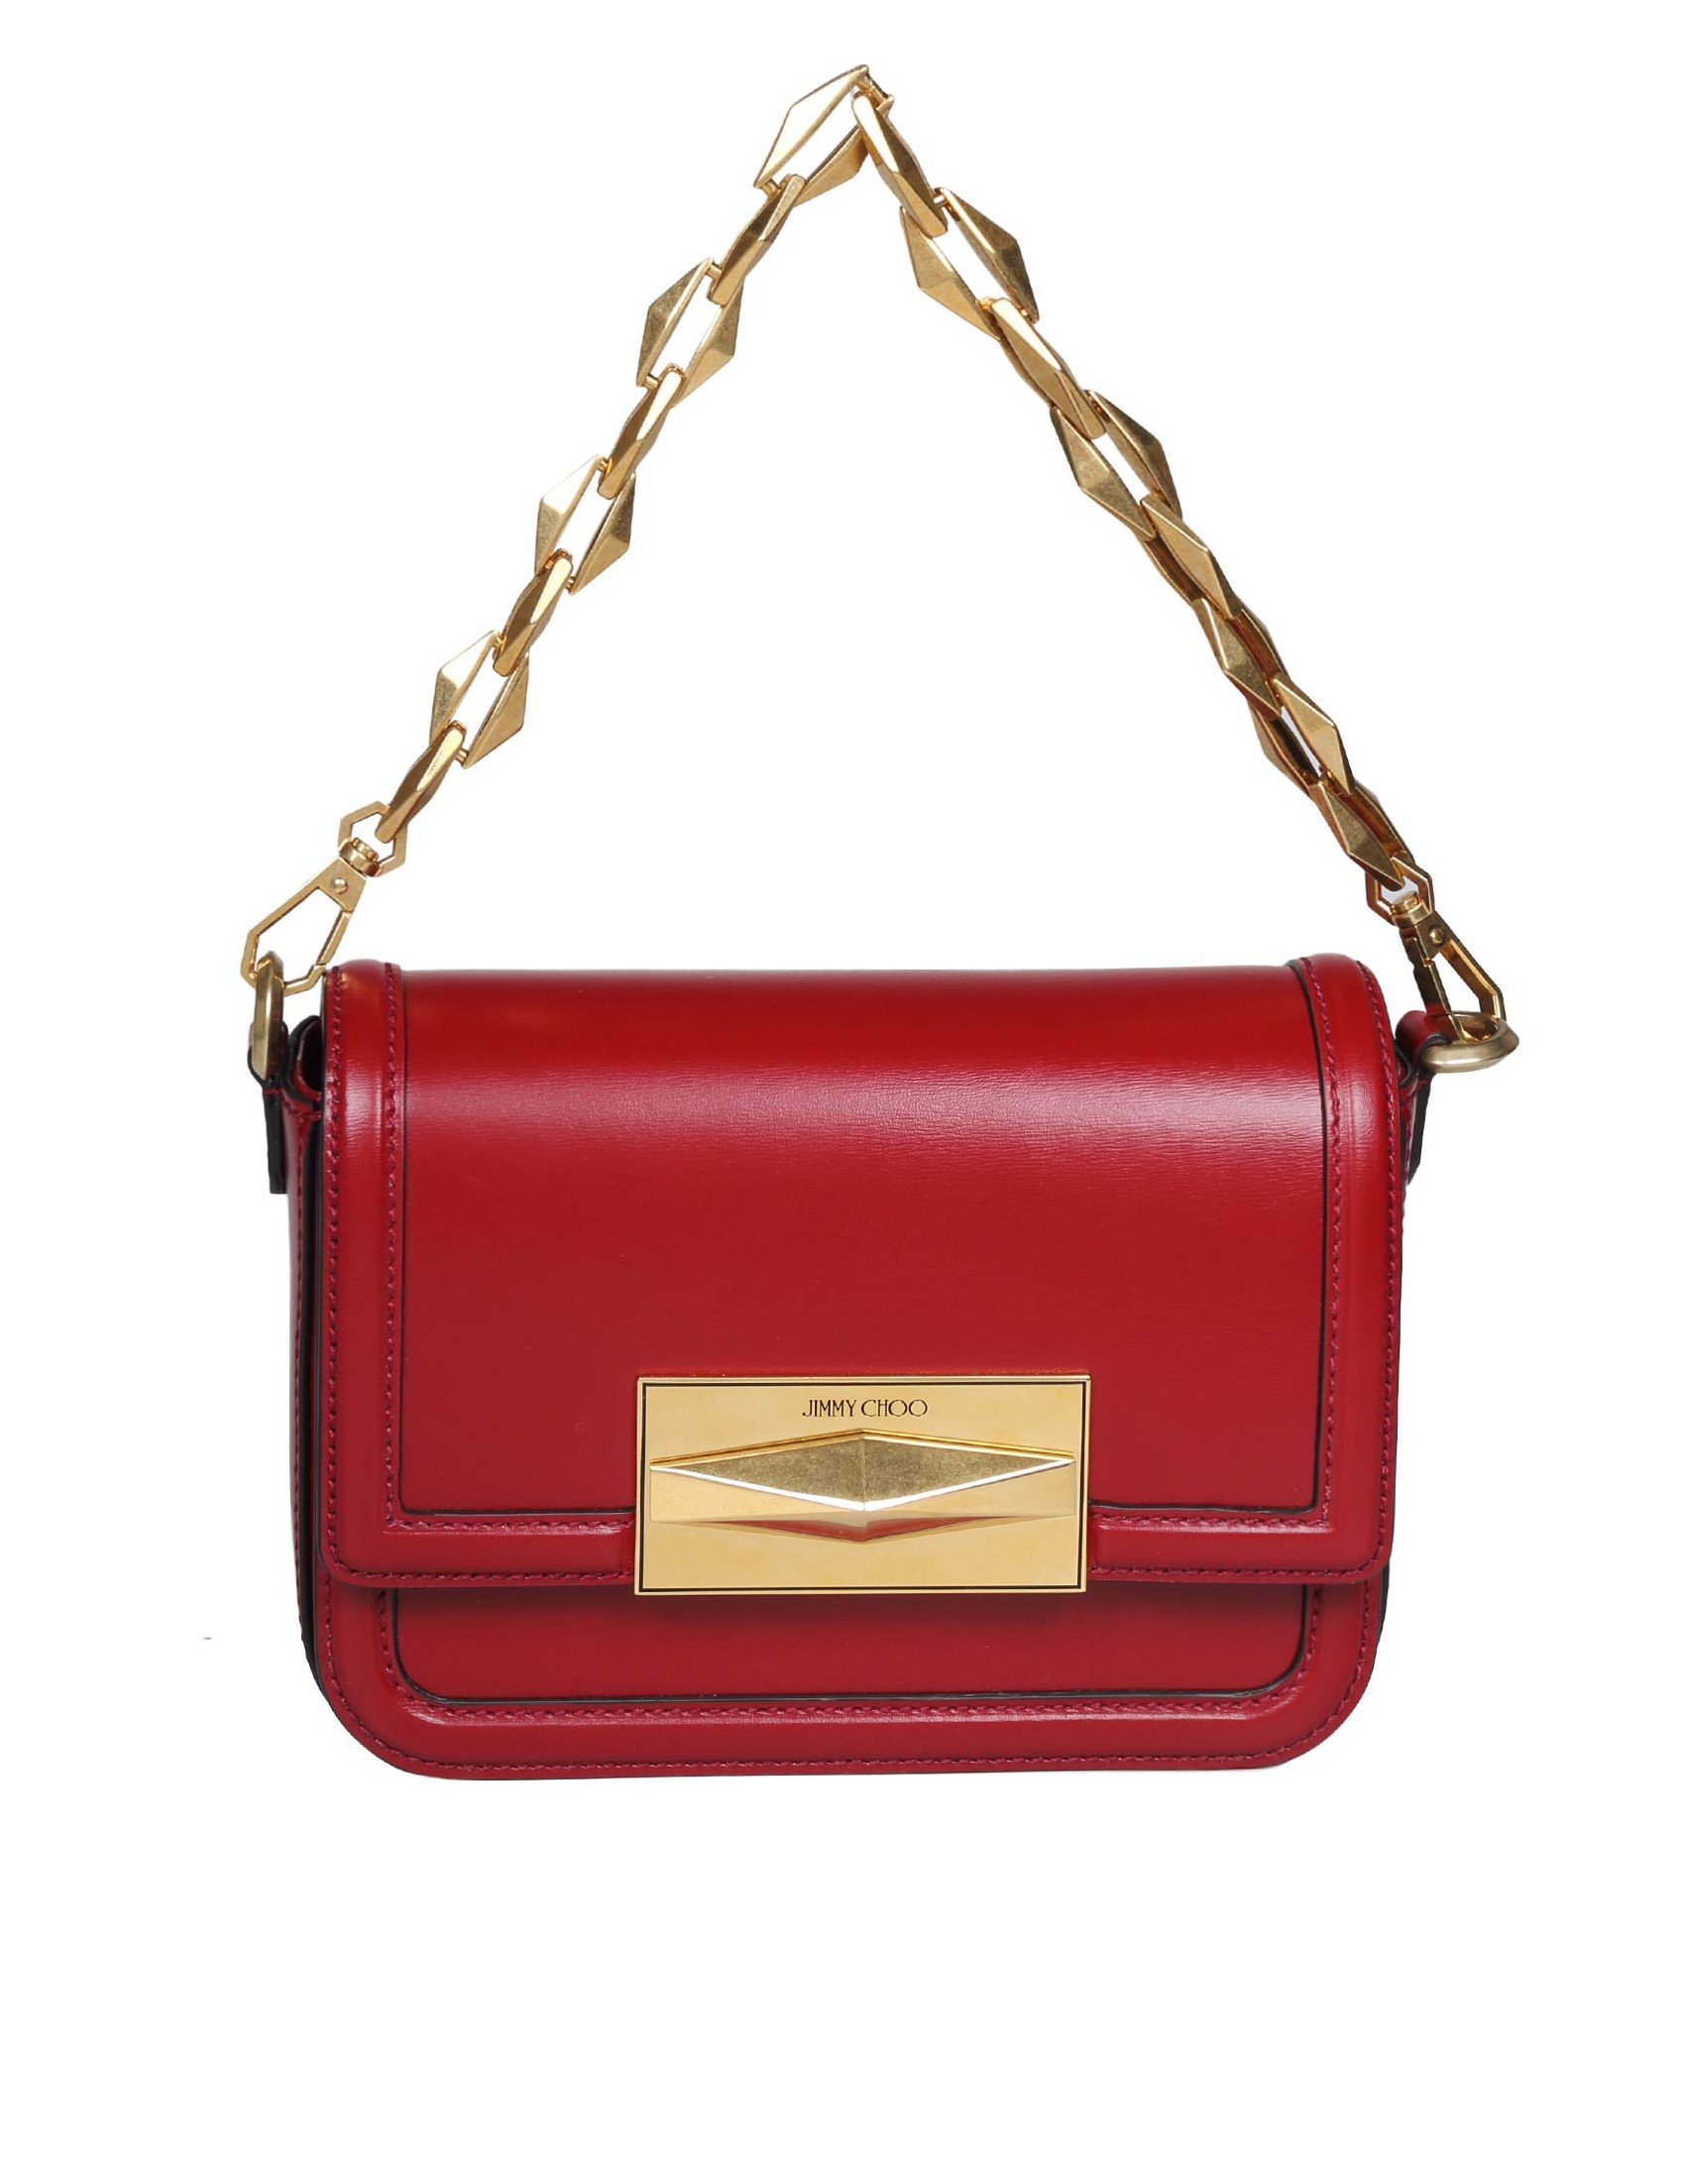 JIMMY CHOO DIAMOND CROSSBODY BAG IN CRANBERRY COLOR LEATHER